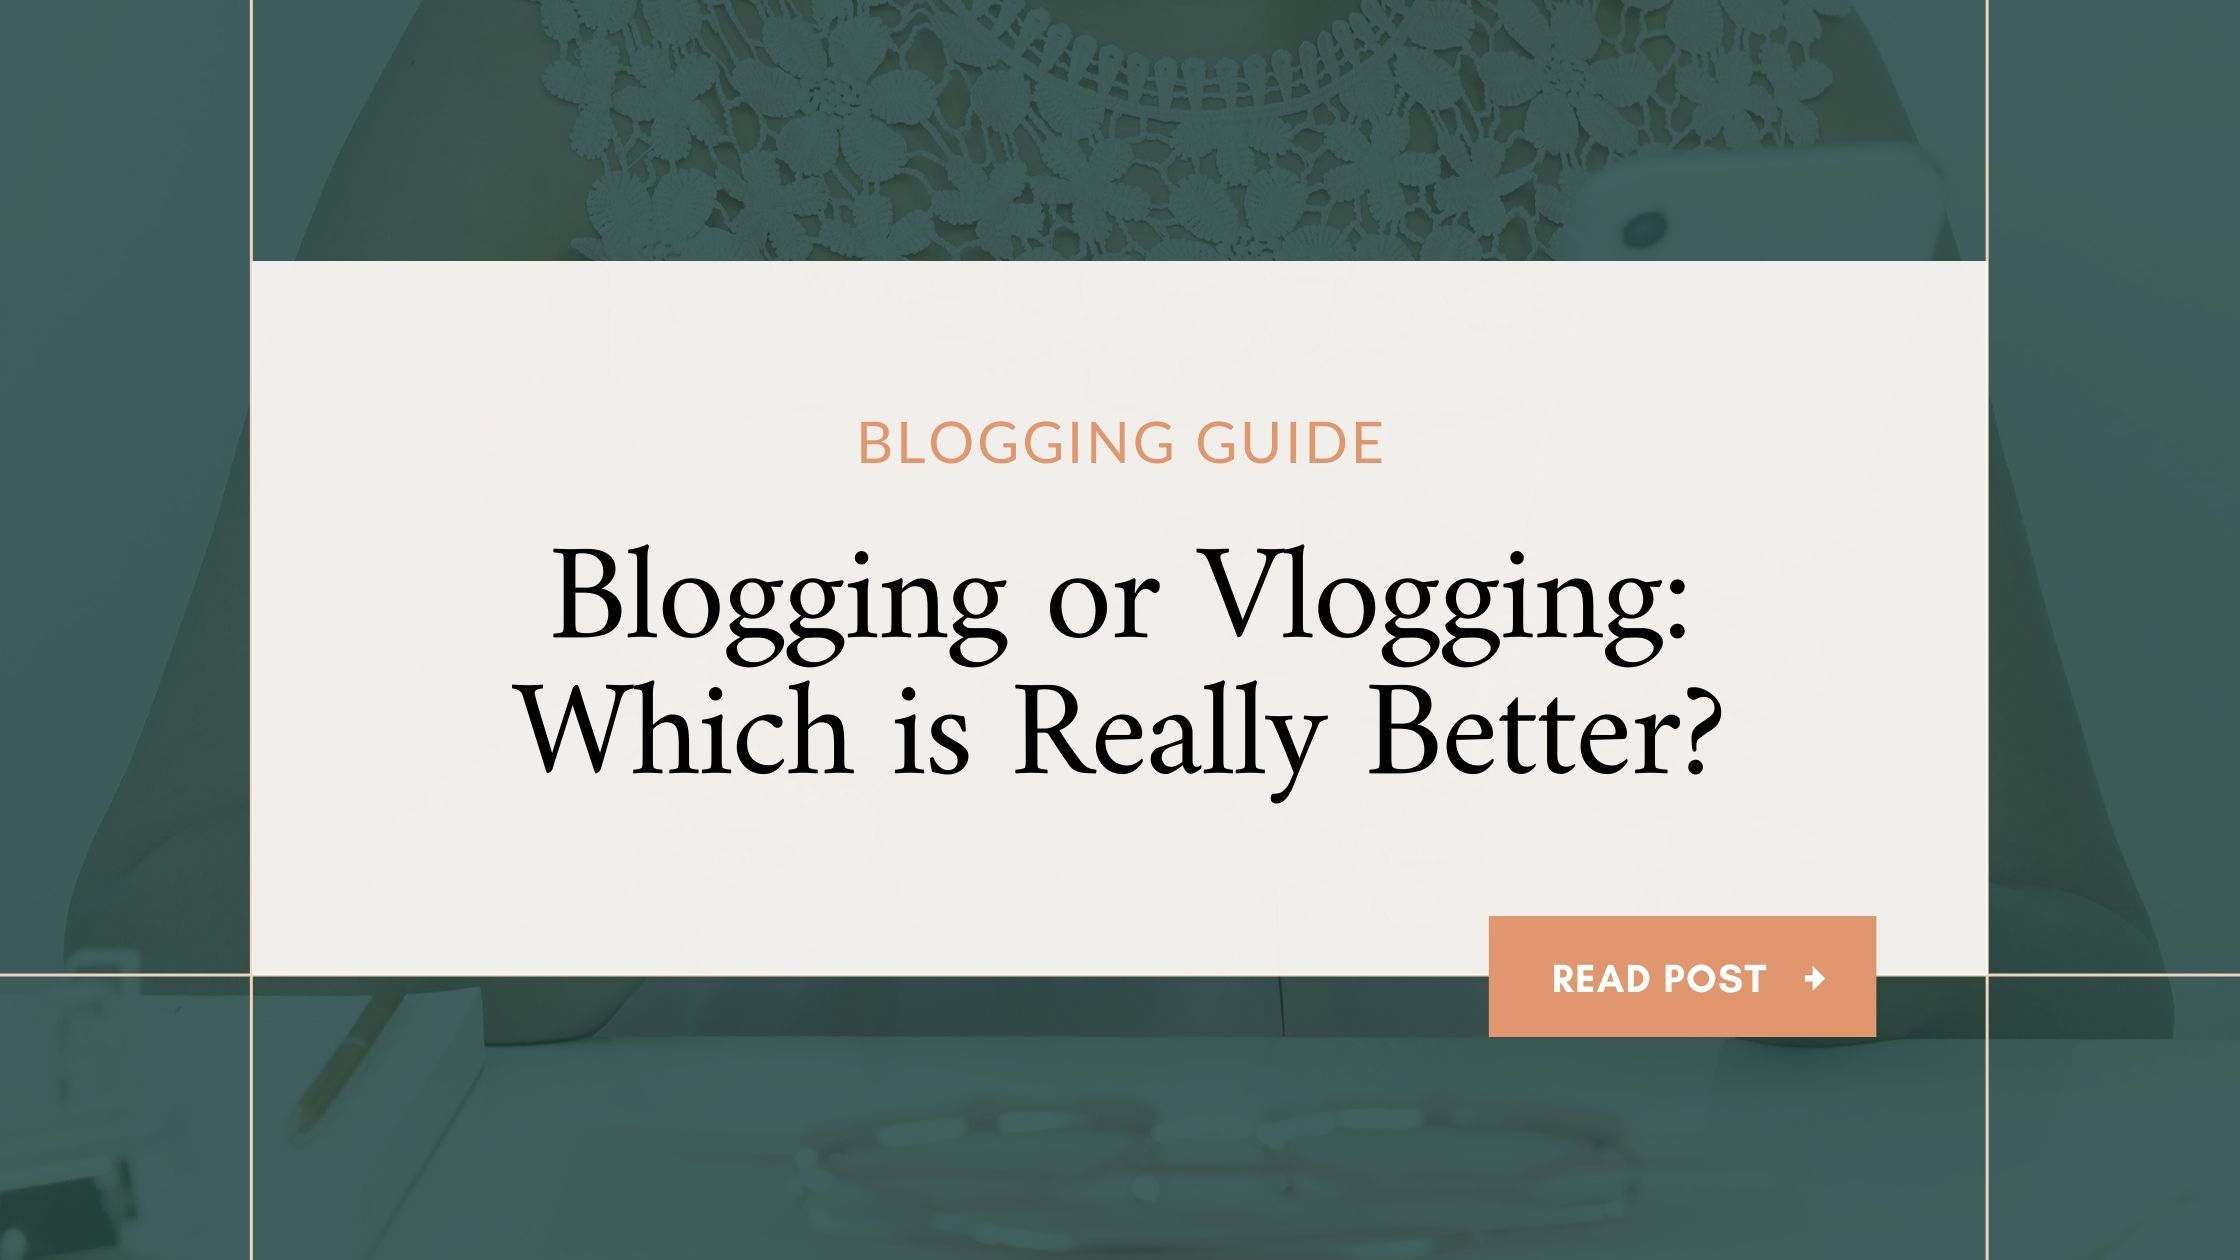 Blogging or Vlogging: Which is Really Better?